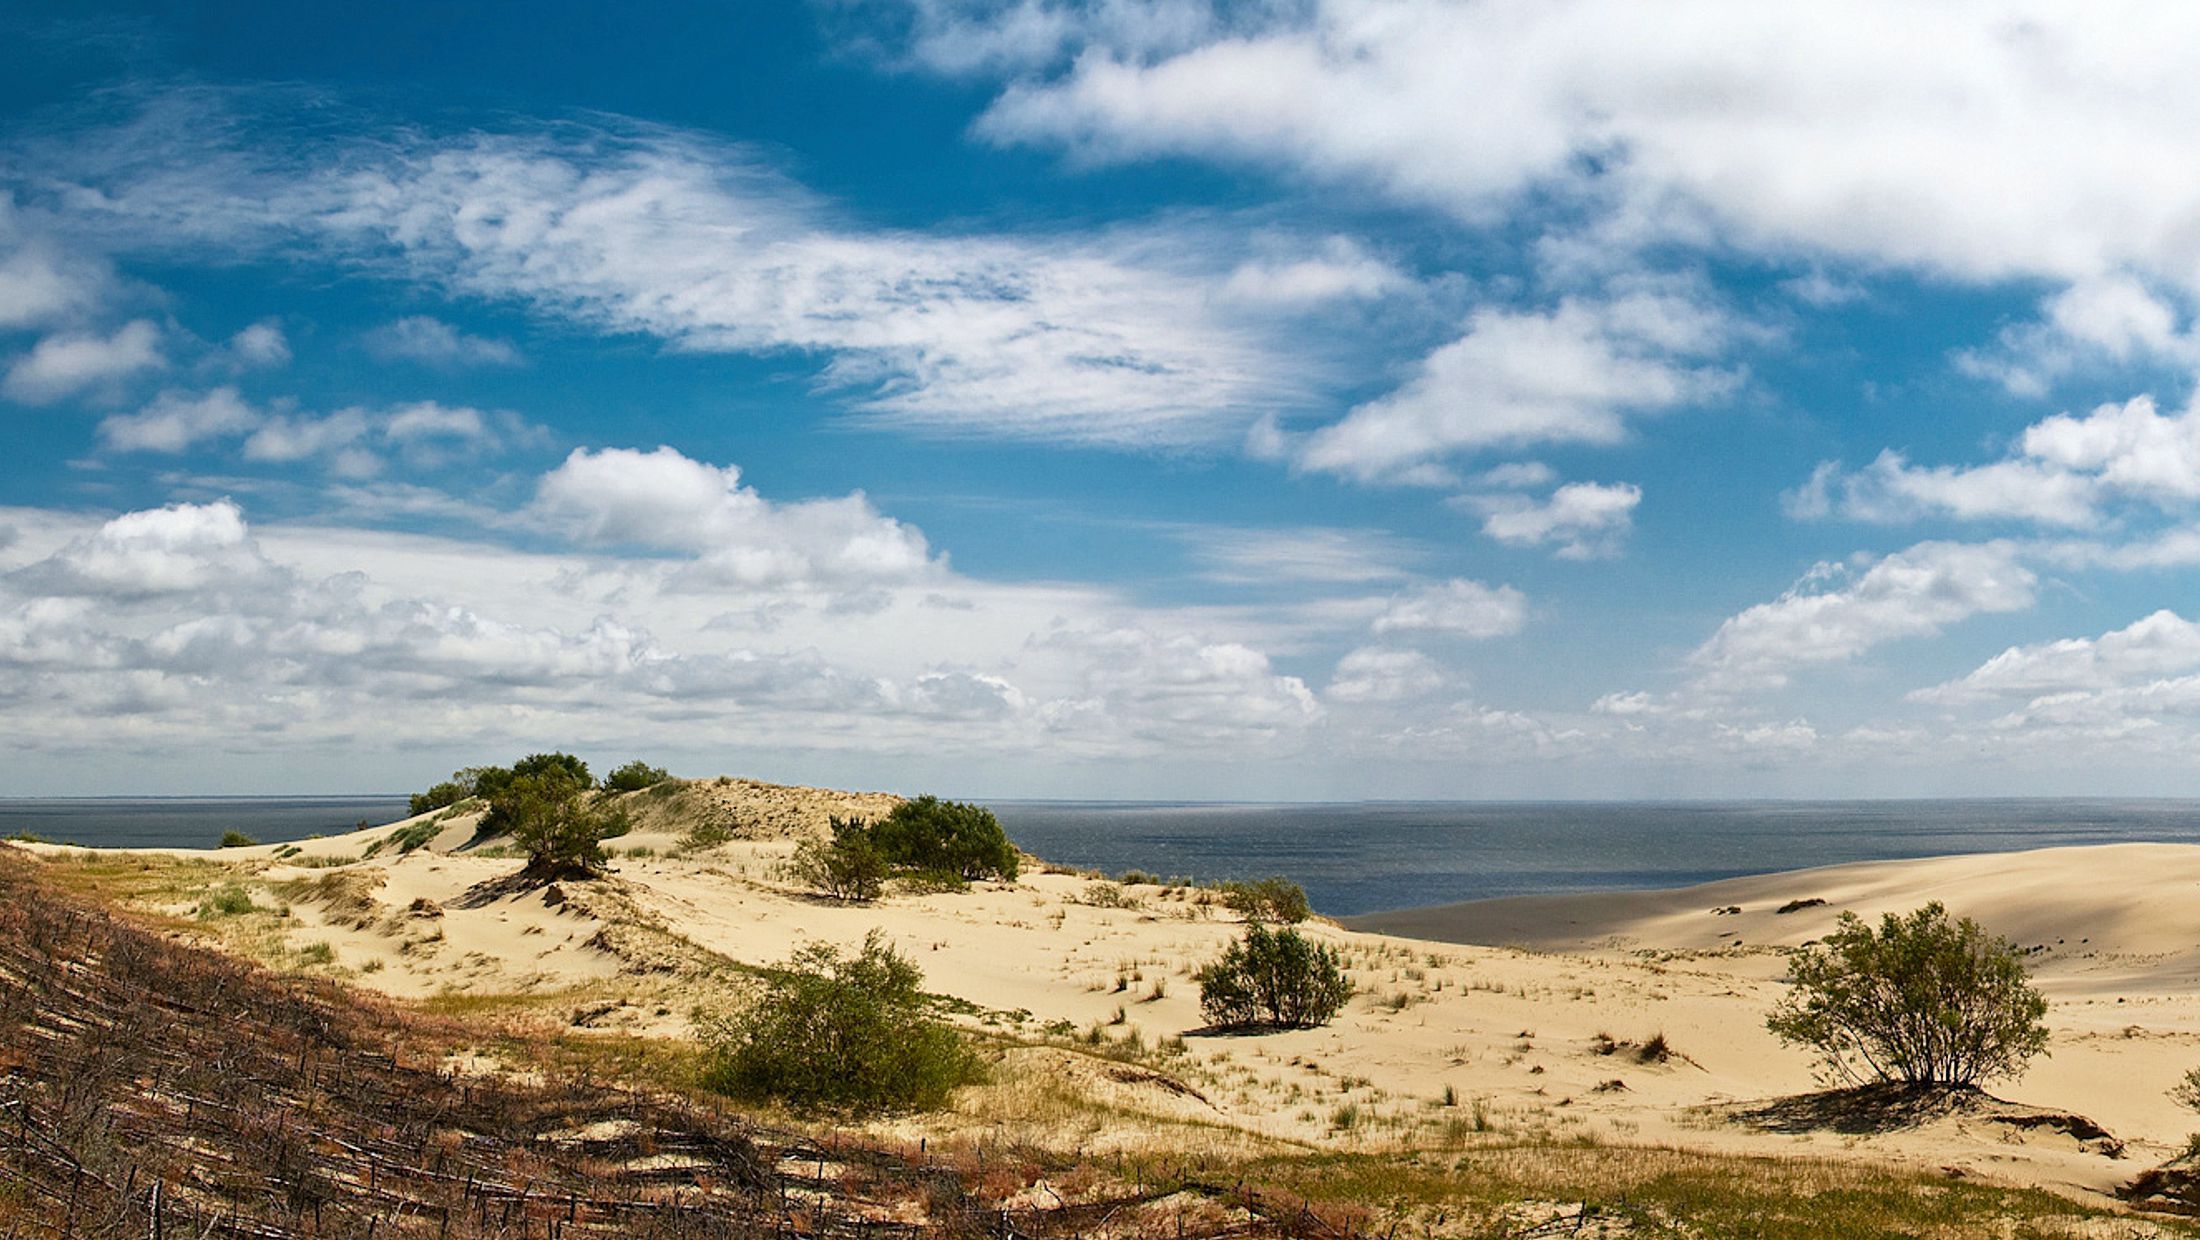 Day 3. The Curonian spit